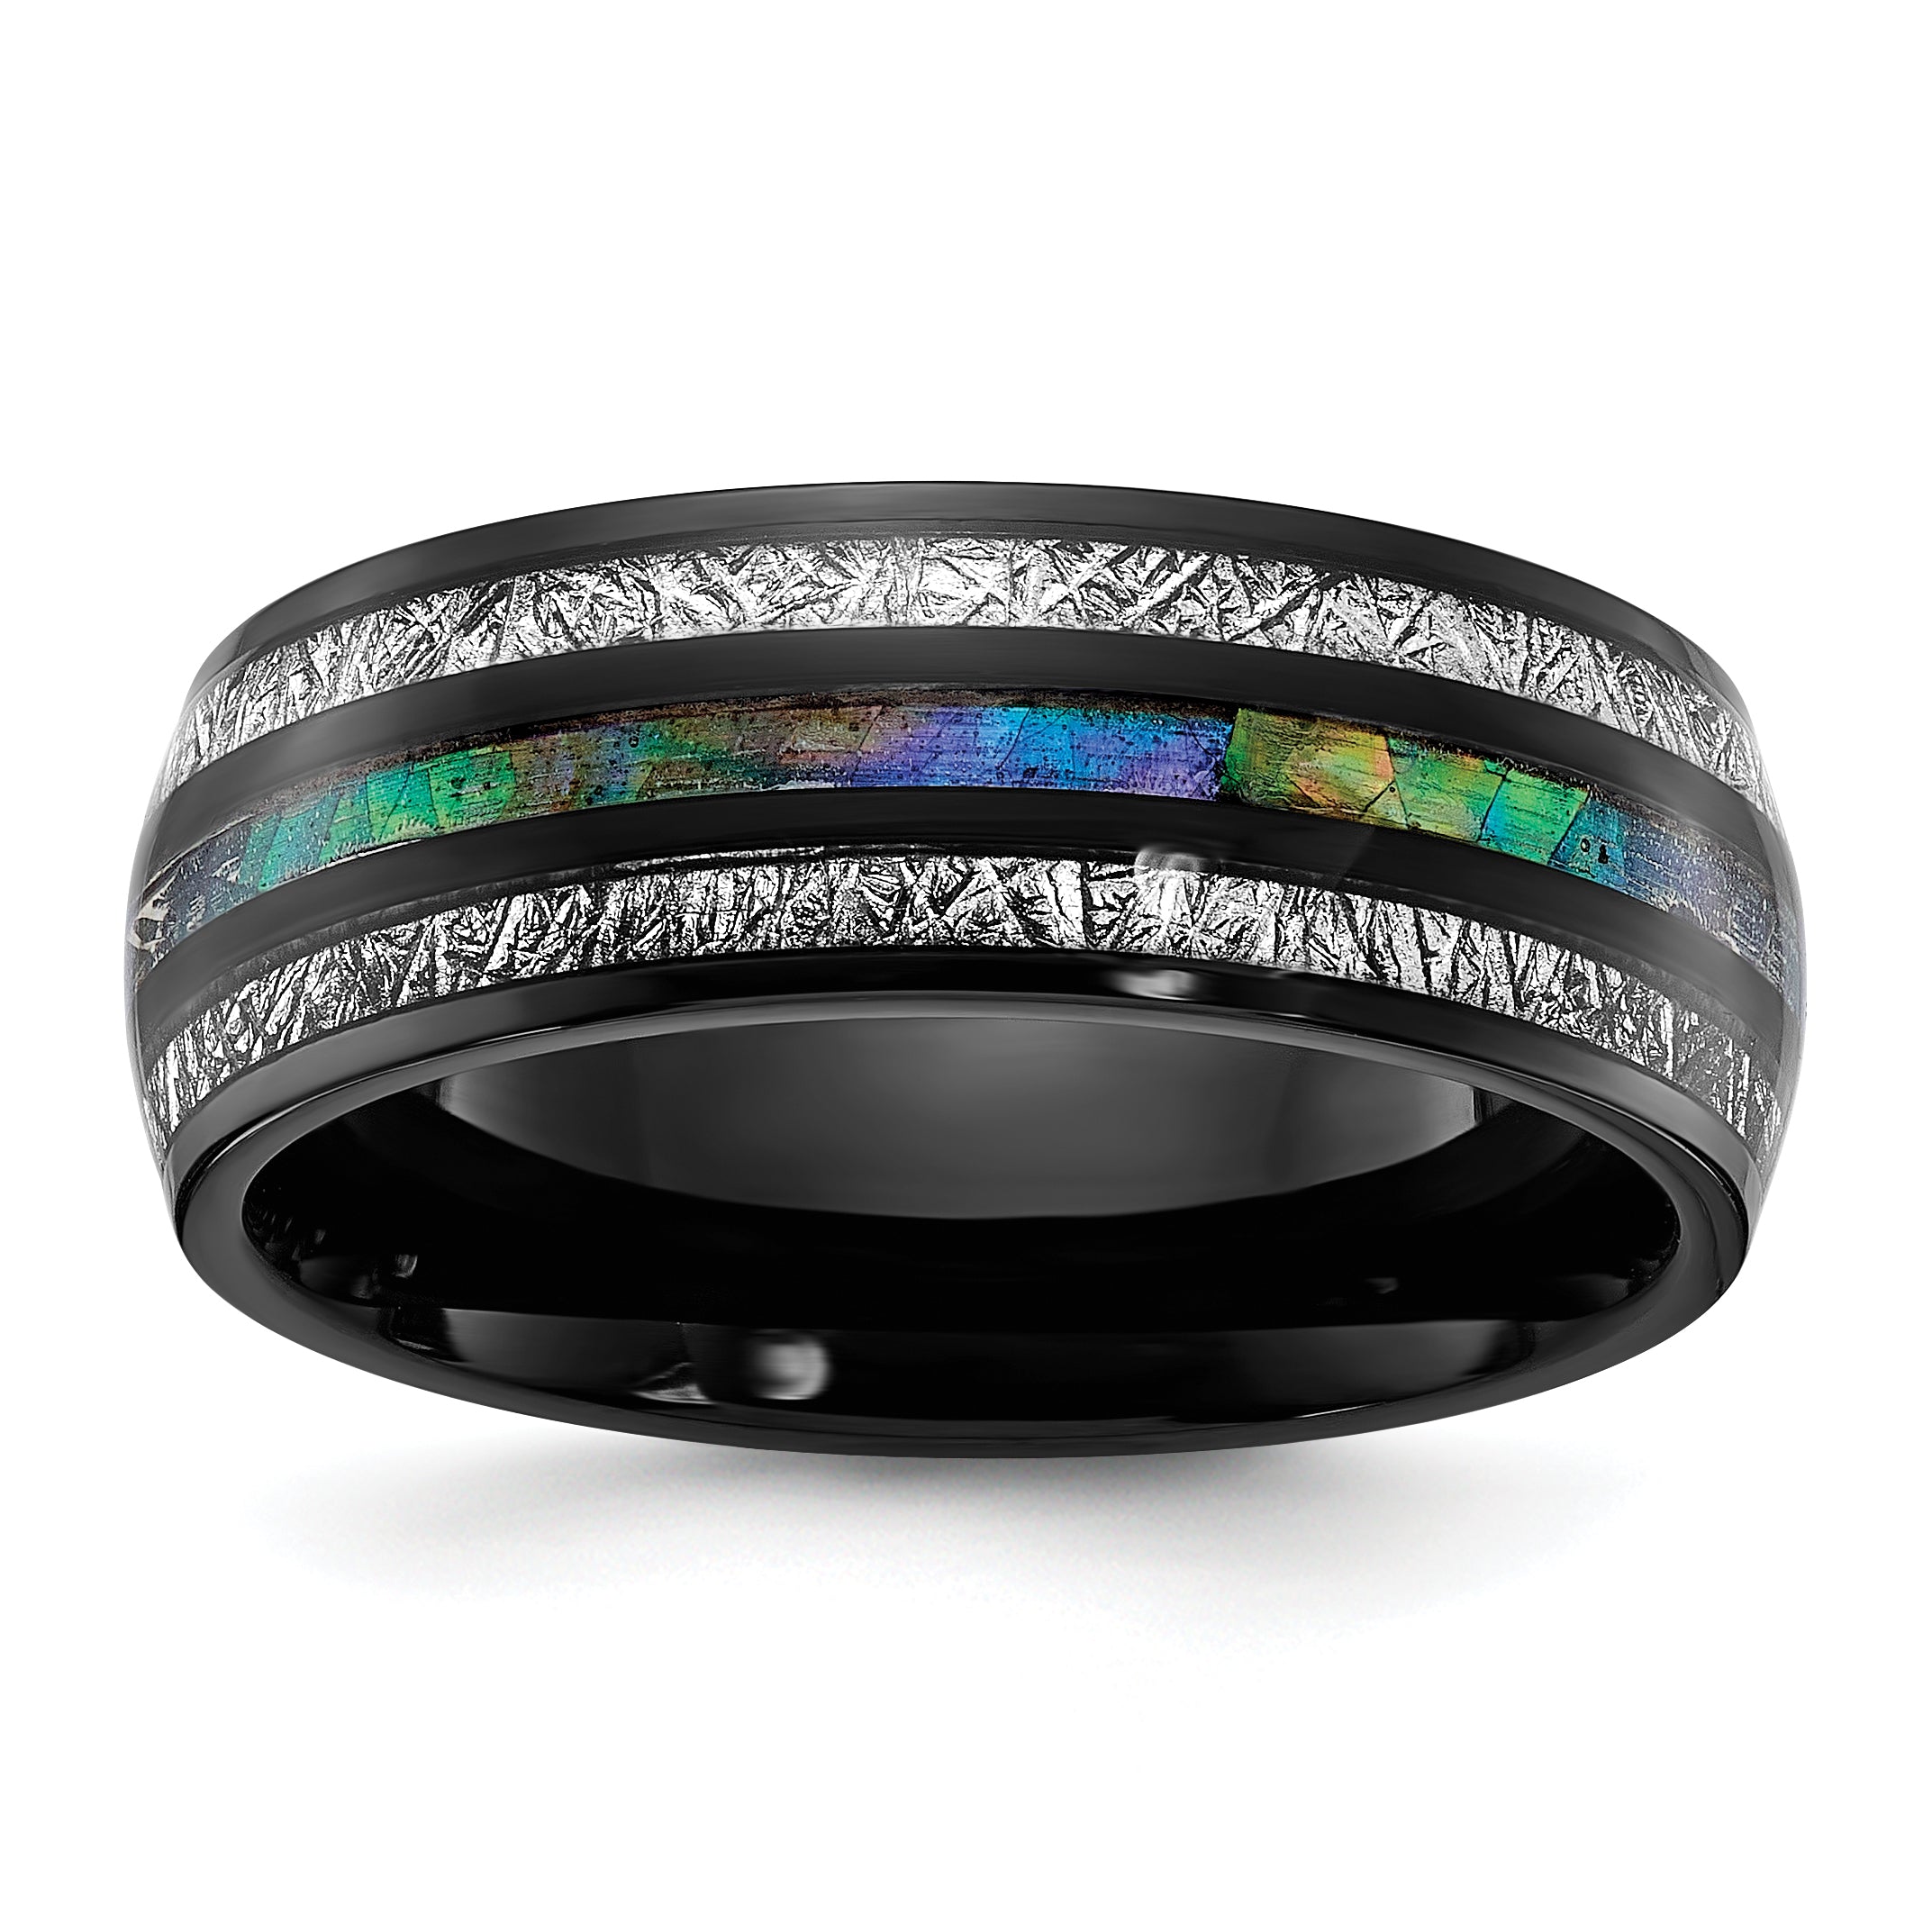 Titanium Polished Black IP-plated with Abalone and Imitation Meteorite Inlay 8mm Band